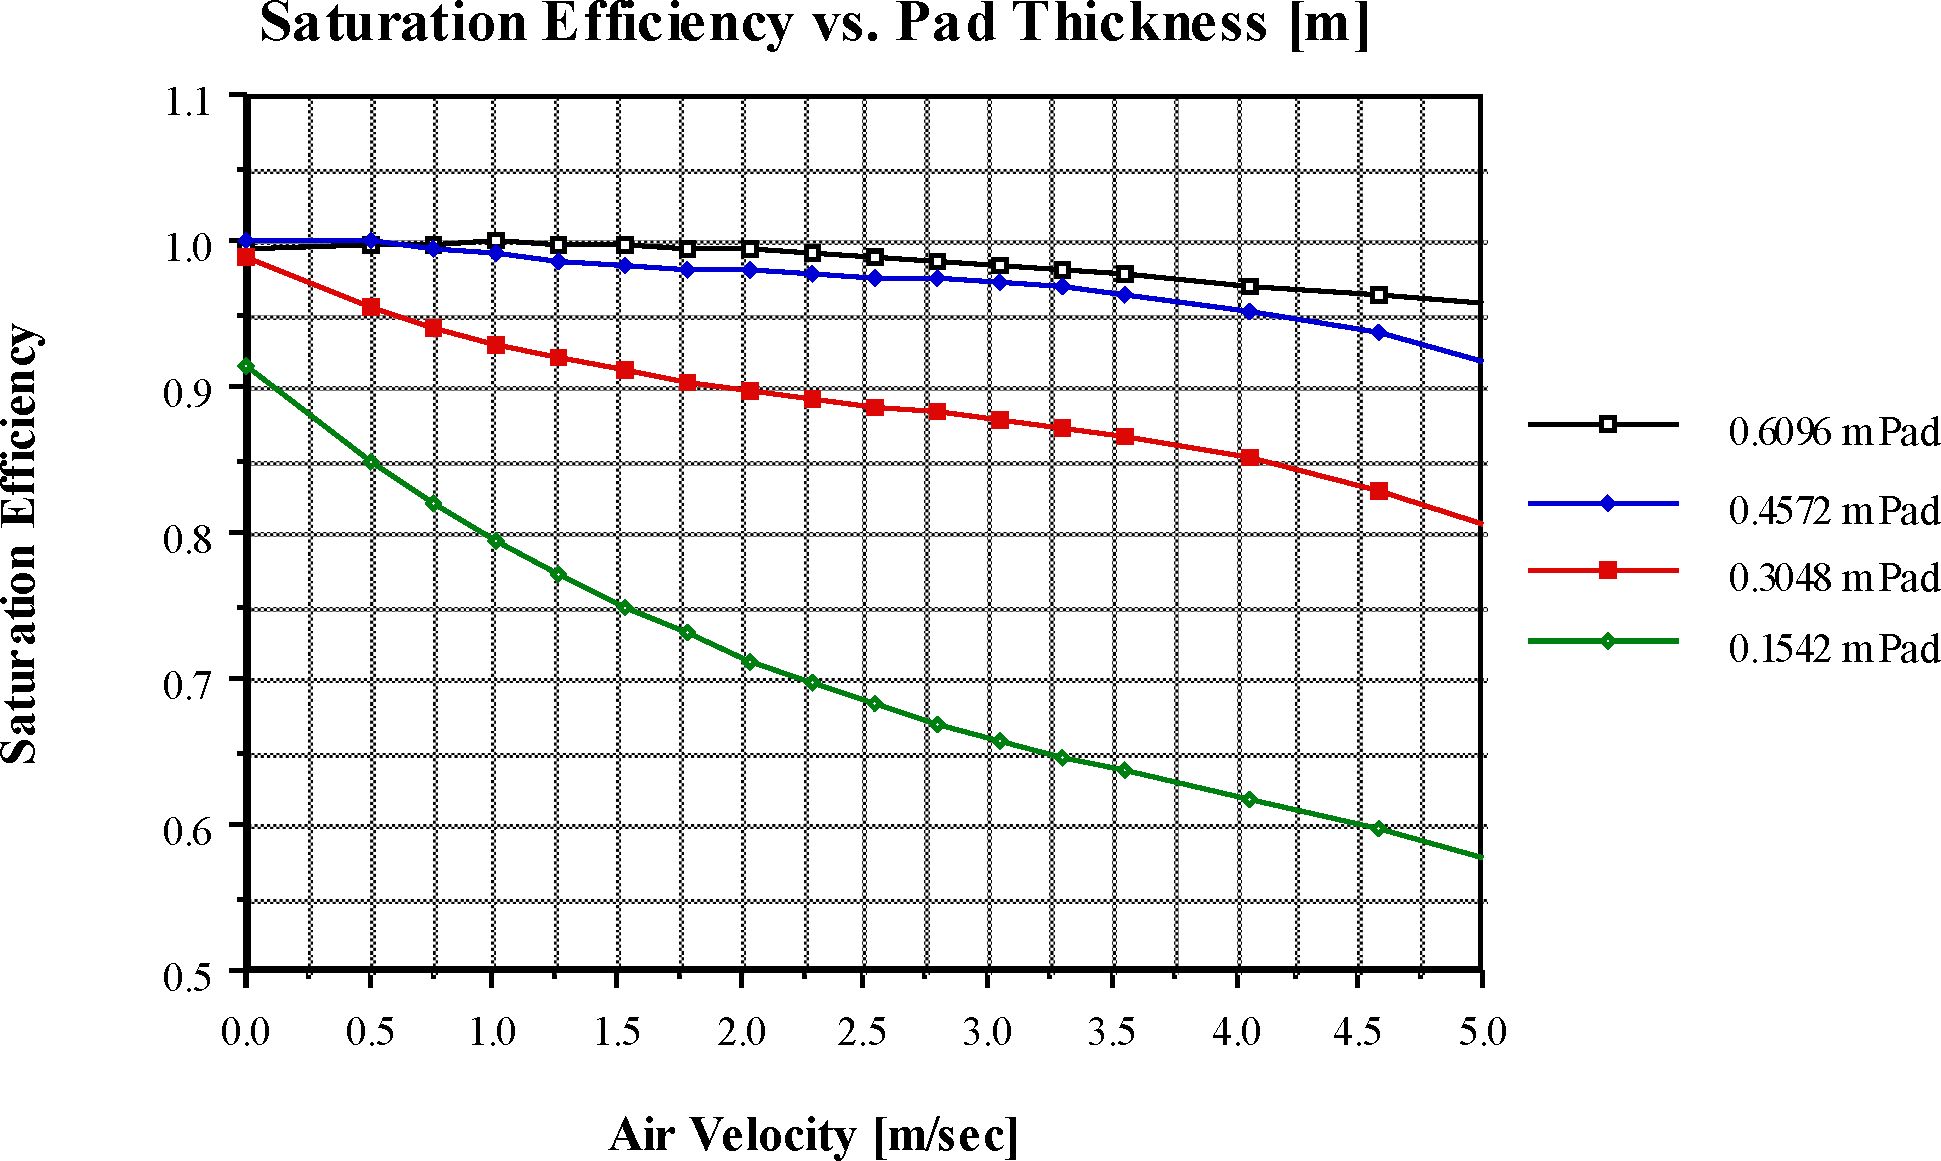 Graph of Saturation Efficiency